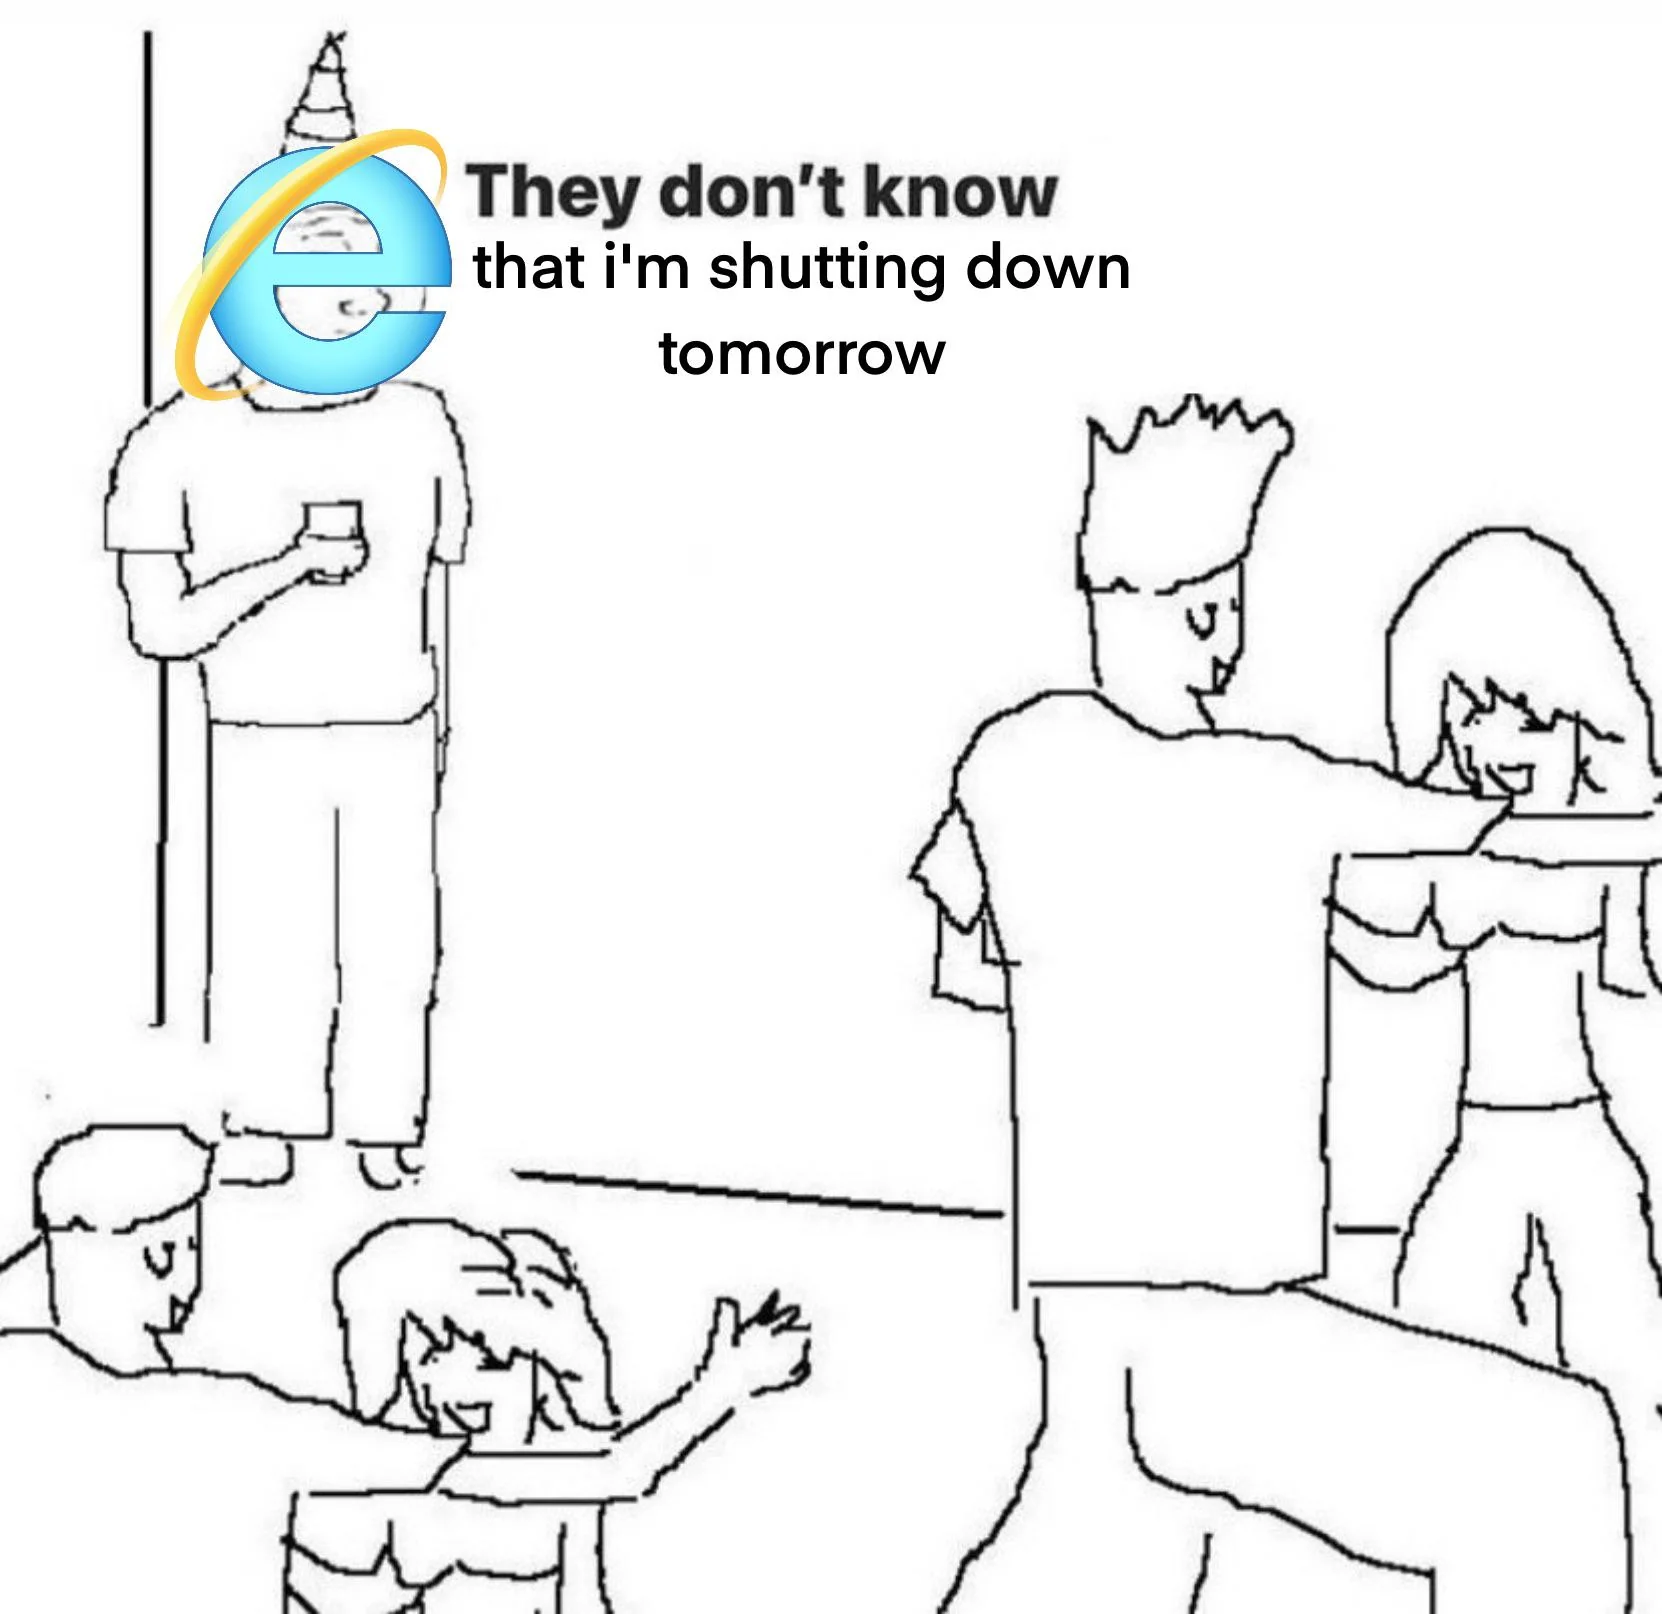 relatable memes - they dont know im shutting down tomorrow meme - They don't know that i'm shutting down tomorrow sez